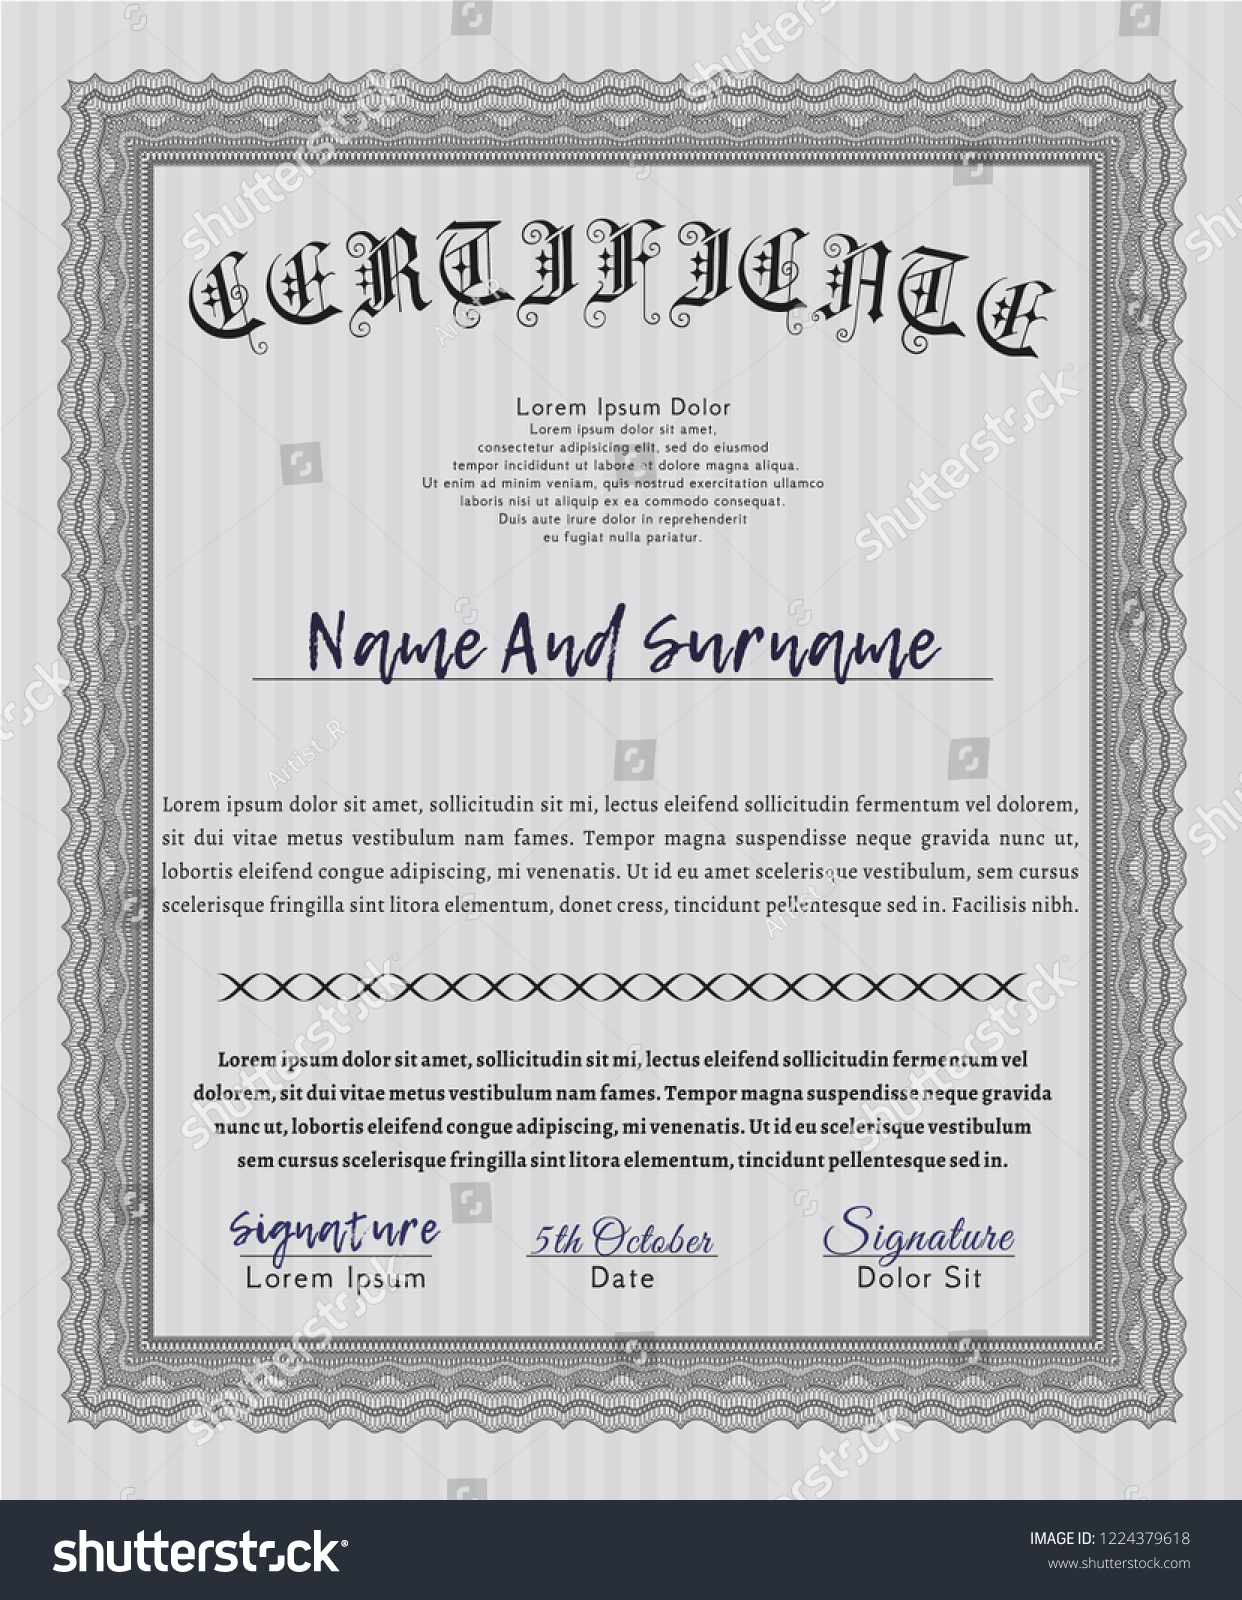 Grey Certificate or diploma template. Perfect - Royalty Free Stock ...